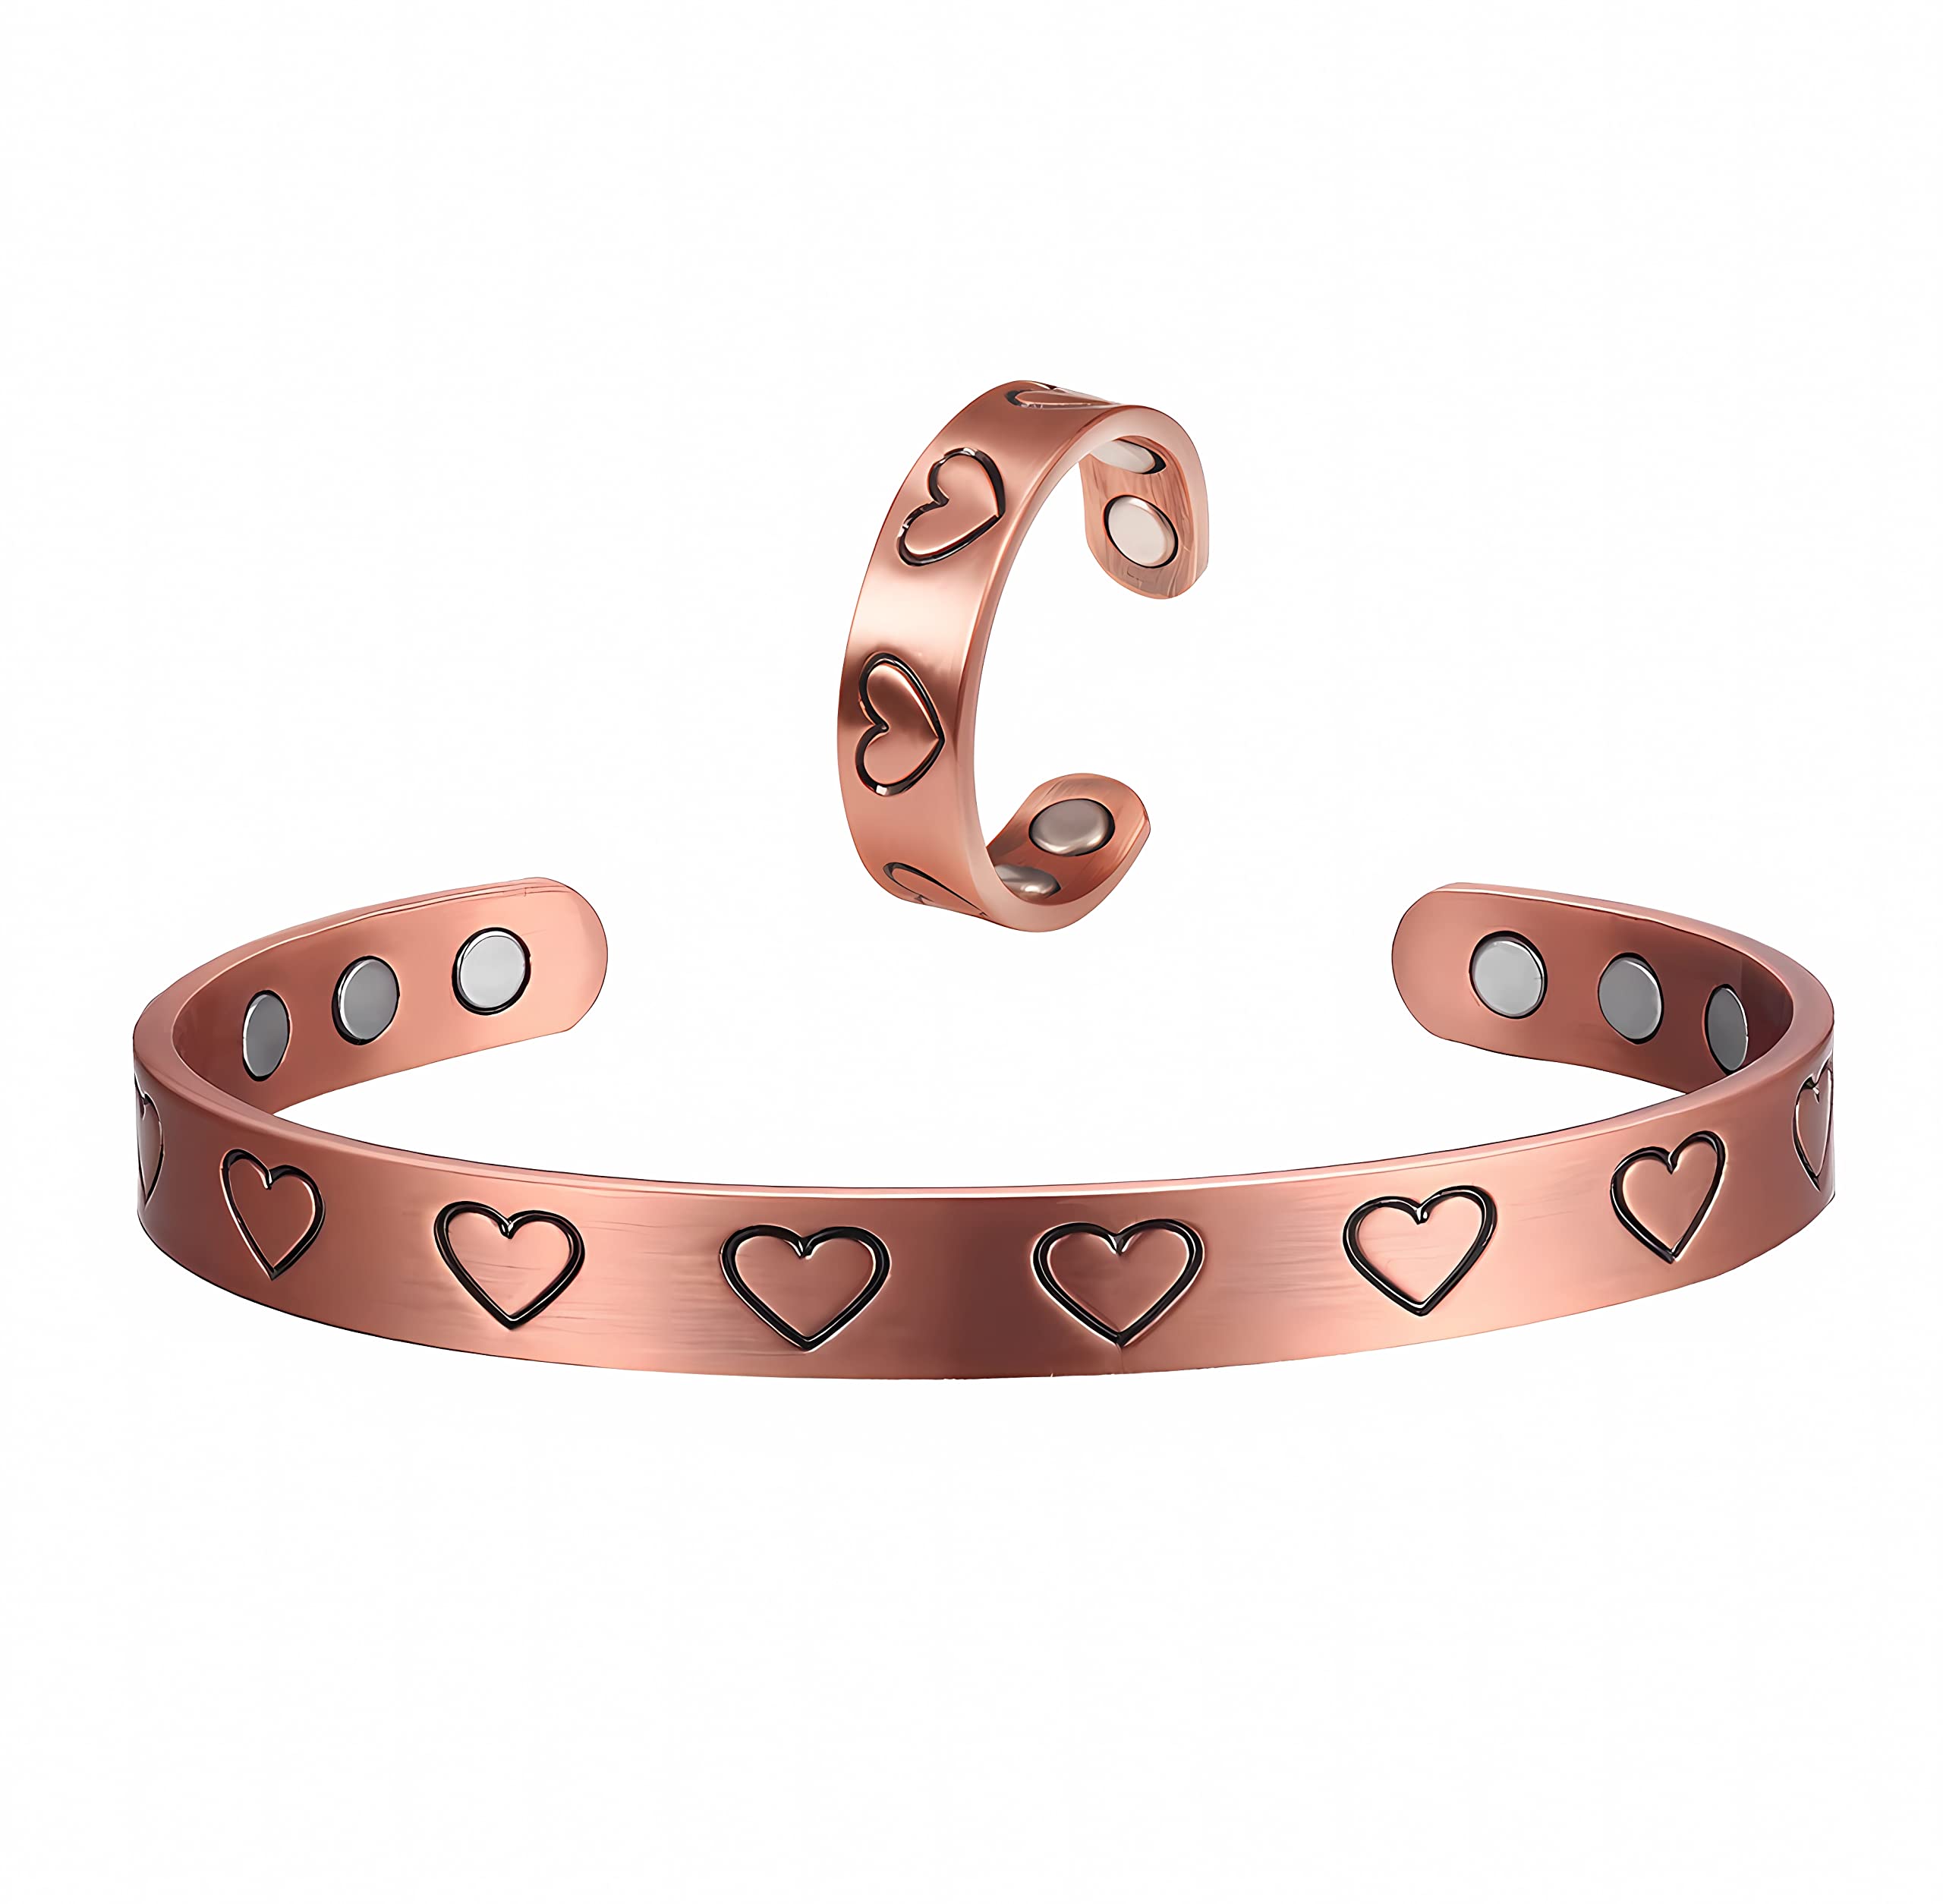 Premium AI Image | A stack of copper bracelets with a floral design on the  top.